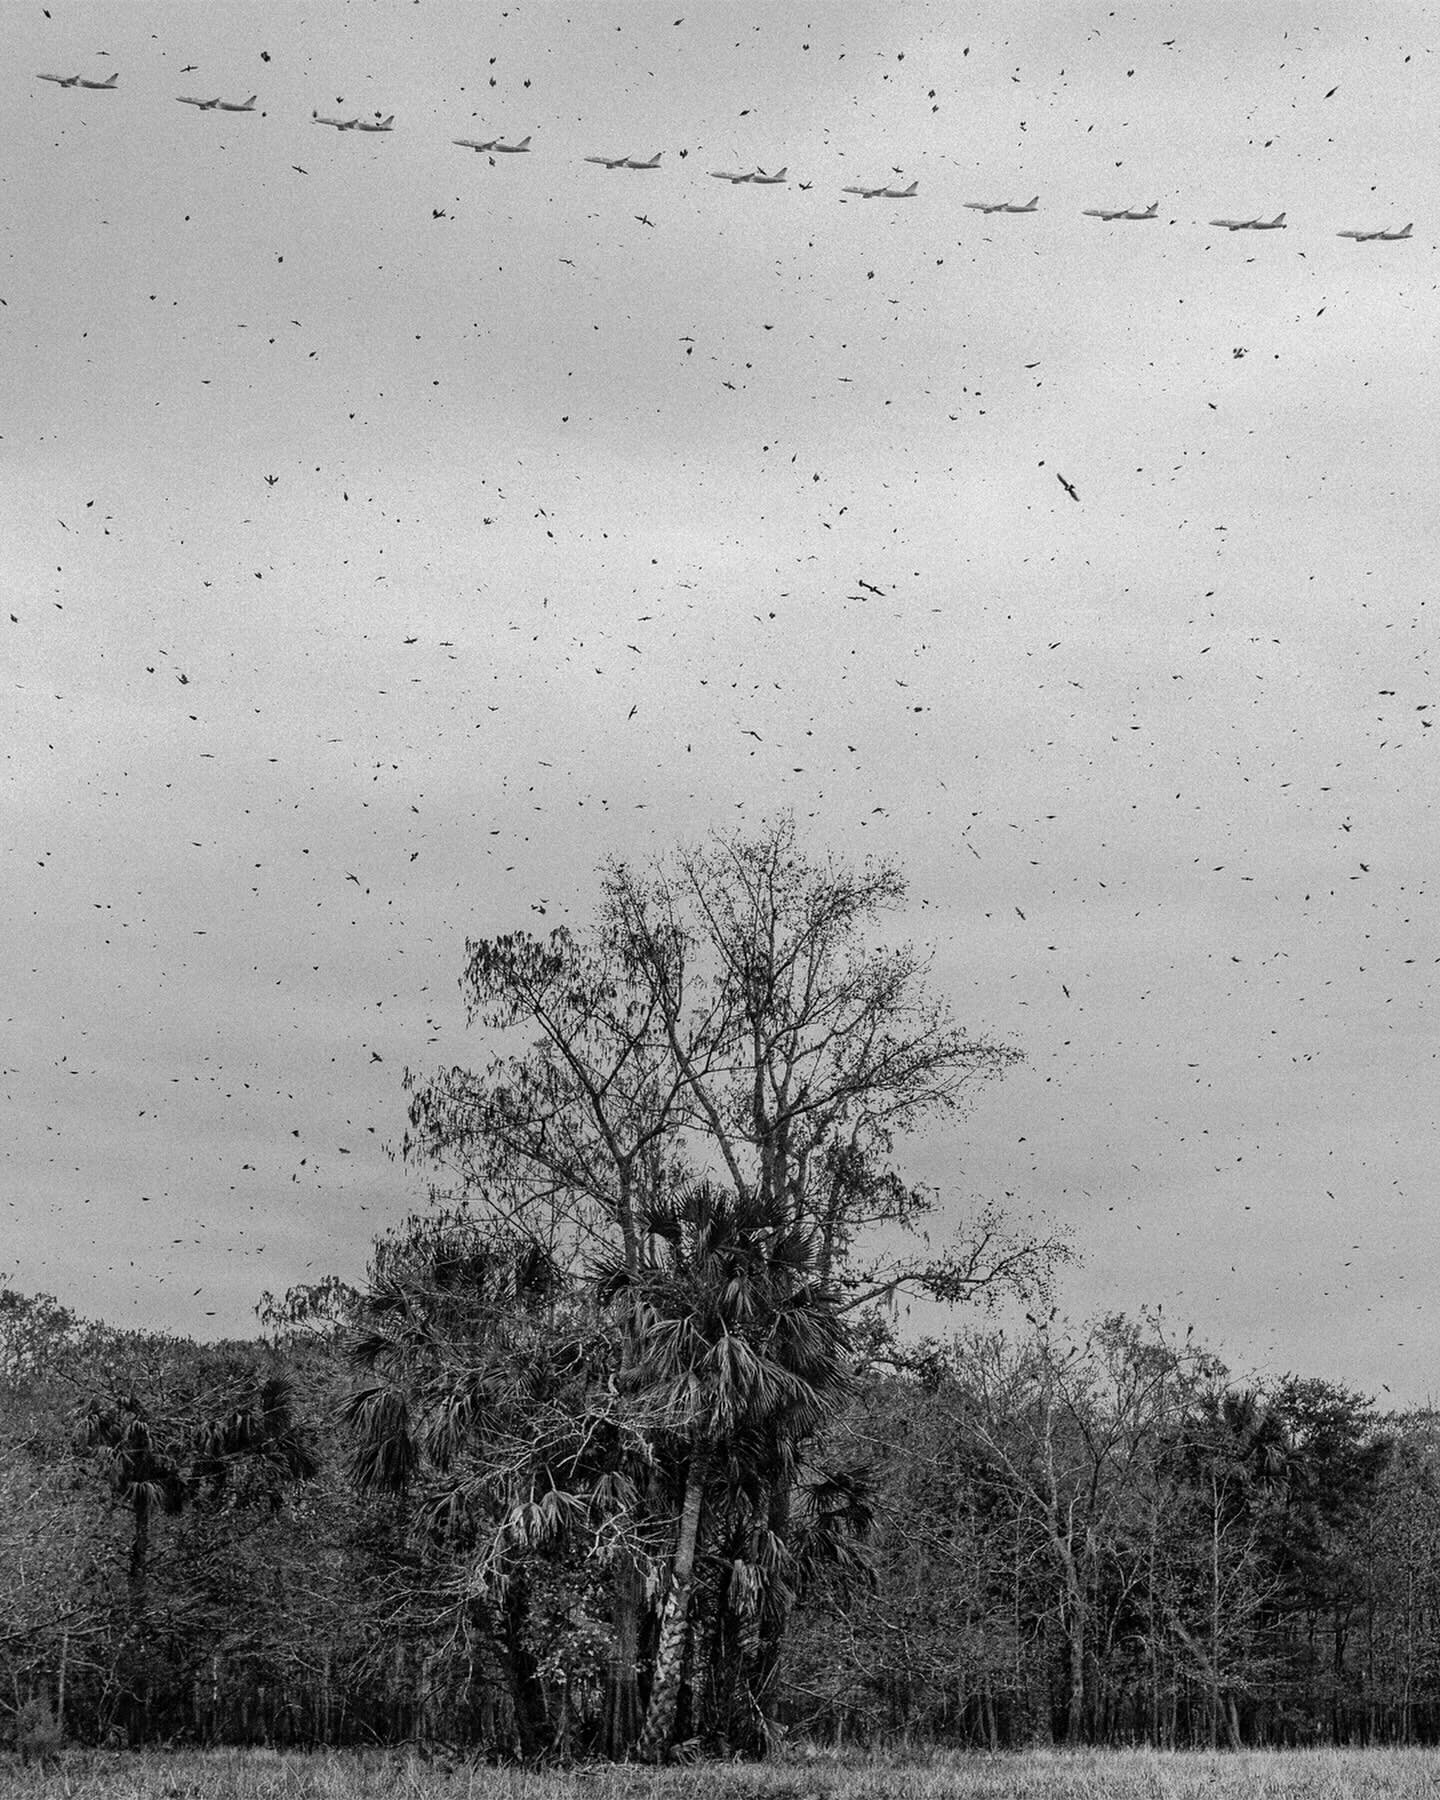 The Broad Mosiac. So many birds, so little time left on this earth. Was racking my brain around how to present this photo once it was finished. Honestly it deserves a huge wall print with an eyeglass to look through all the sharp bird specks. A great